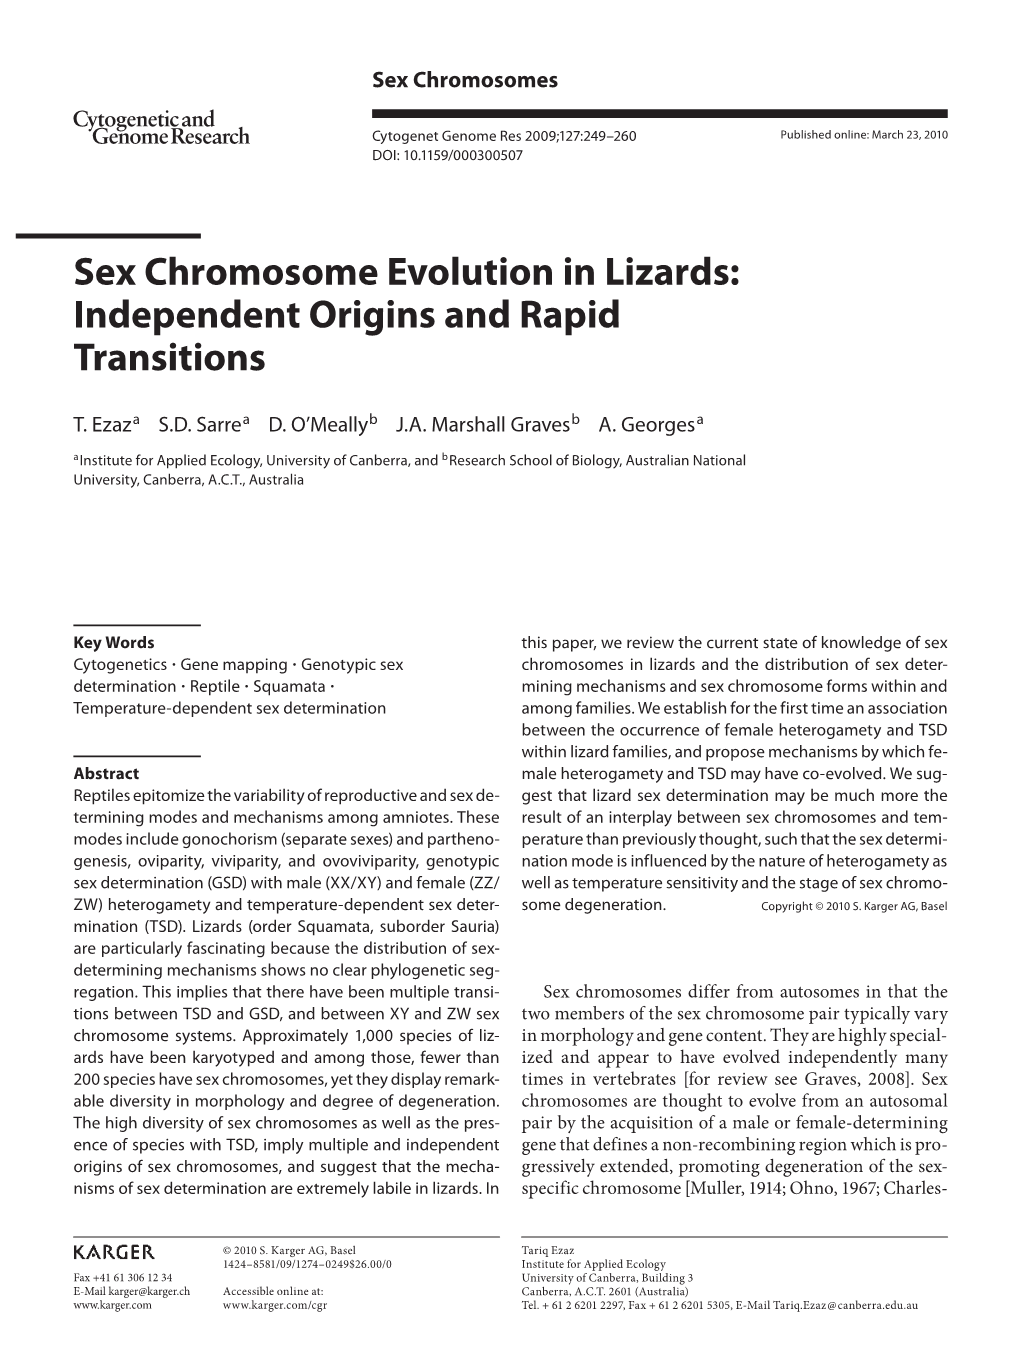 Sex Chromosome Evolution in Lizards: Independent Origins and Rapid Transitions